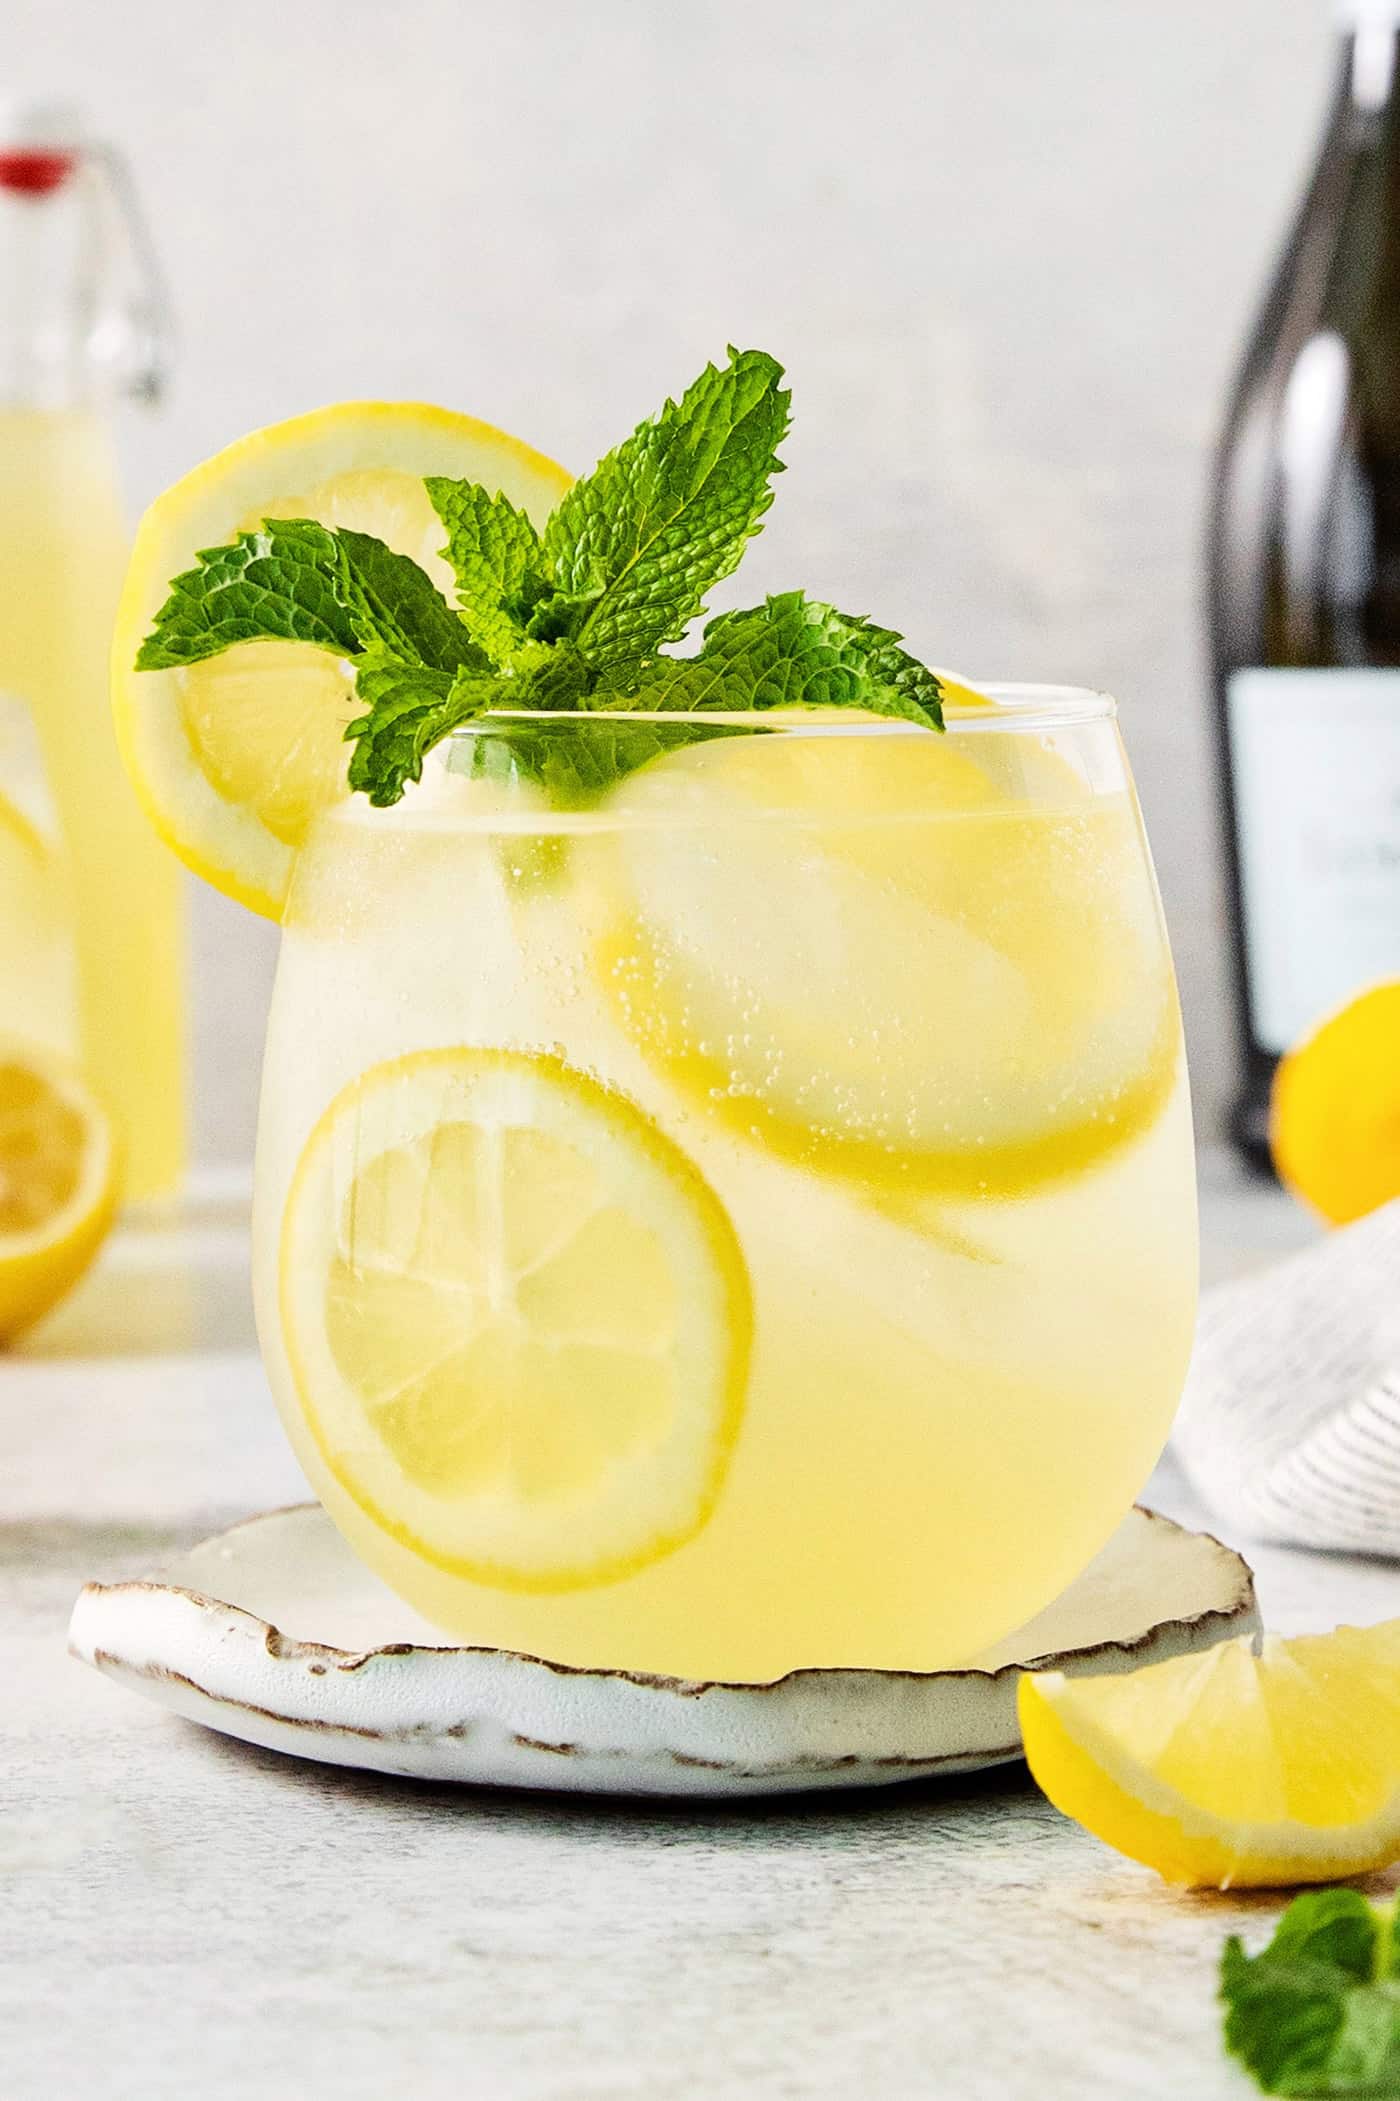 A glass of limoncello spritz garnished with mint.